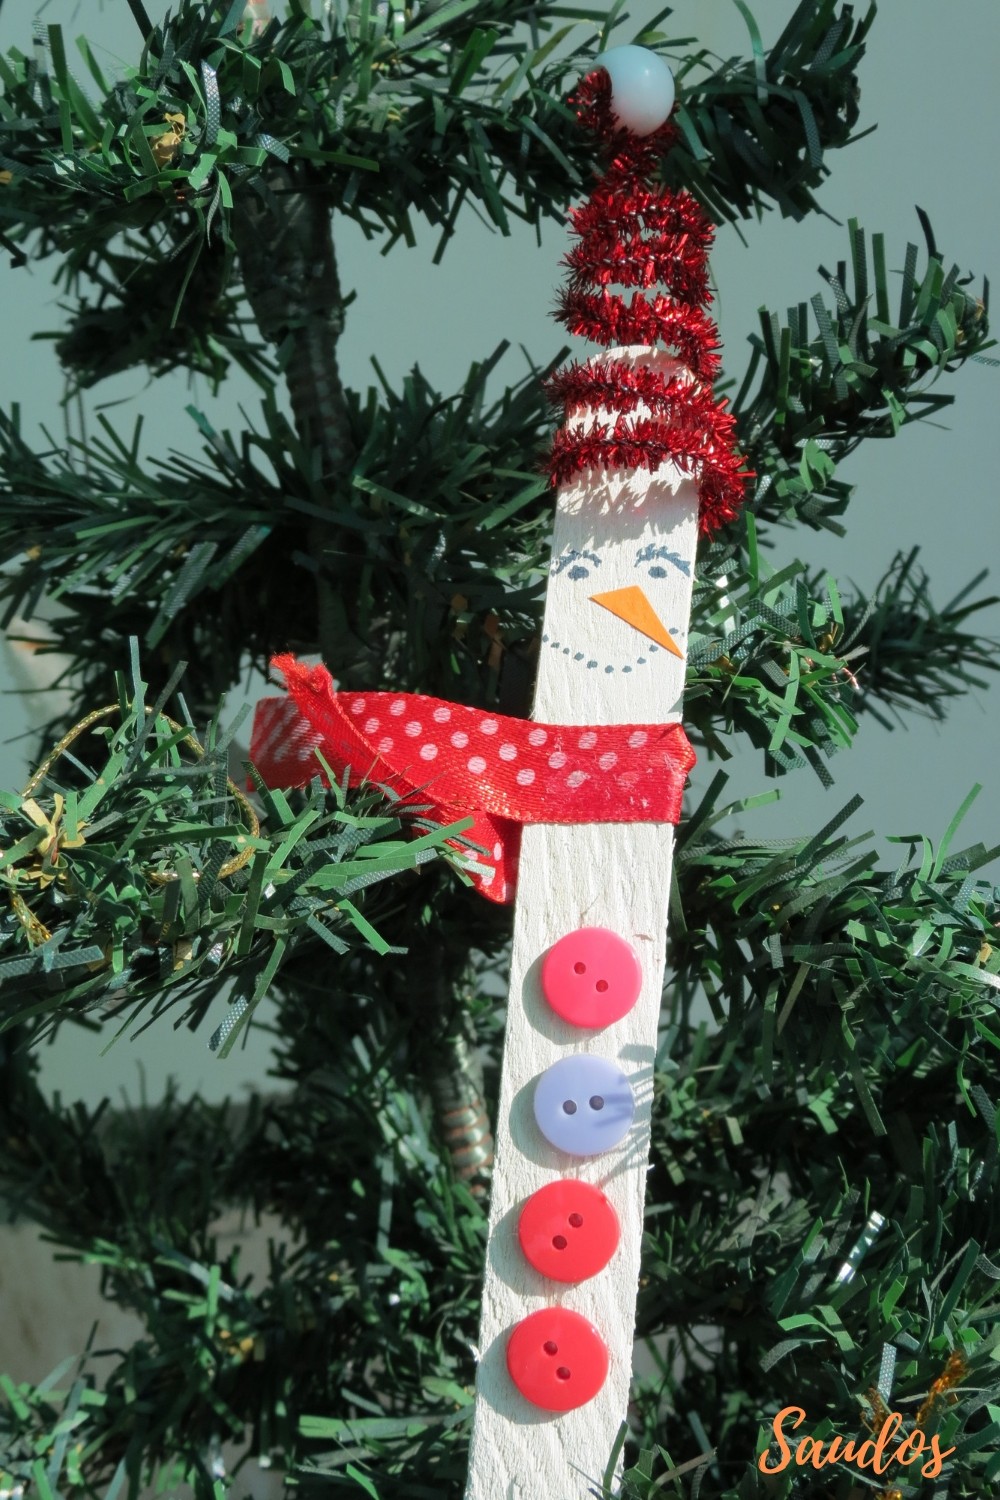 Use Popsicle Stick Snowman Craft to Decor Your Christmas Tree